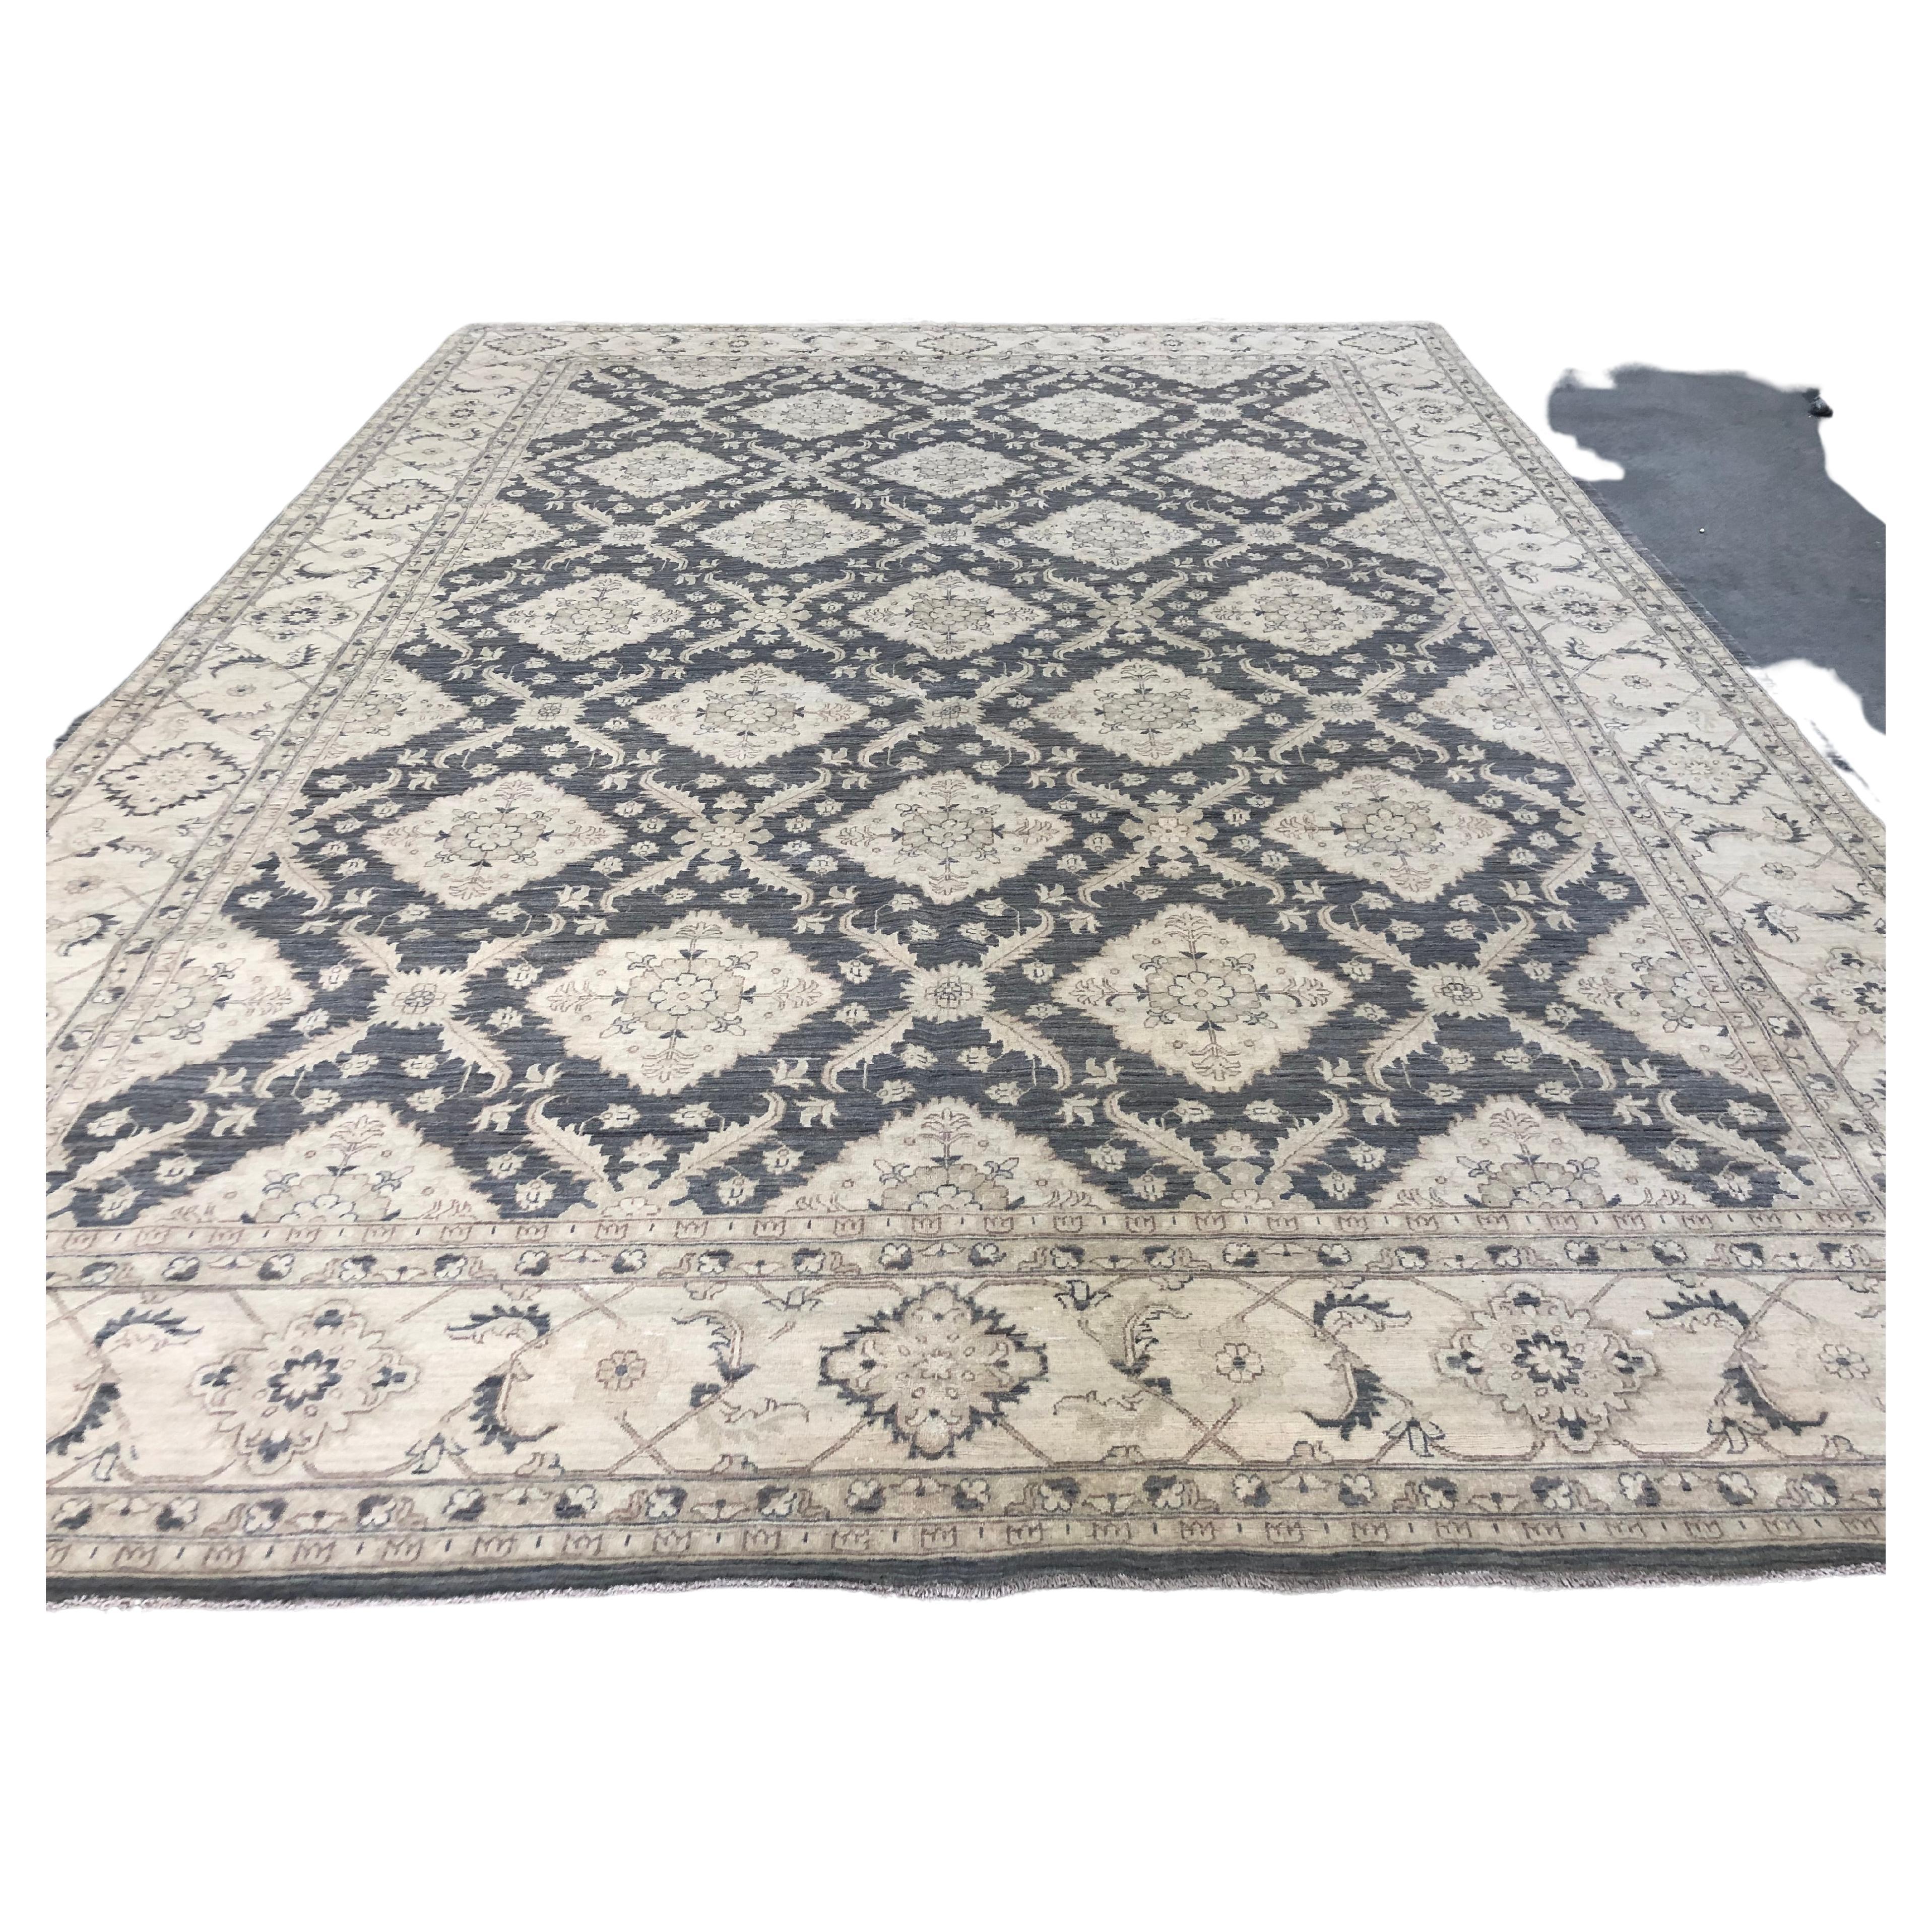 This Diamond and Trellis design is a contemporary take on a rug design that has been in use for centuries. Neat rows of diamond shaped designs framed by stunning intricately woven trellis patterns that is finished with an exquisitely complementary